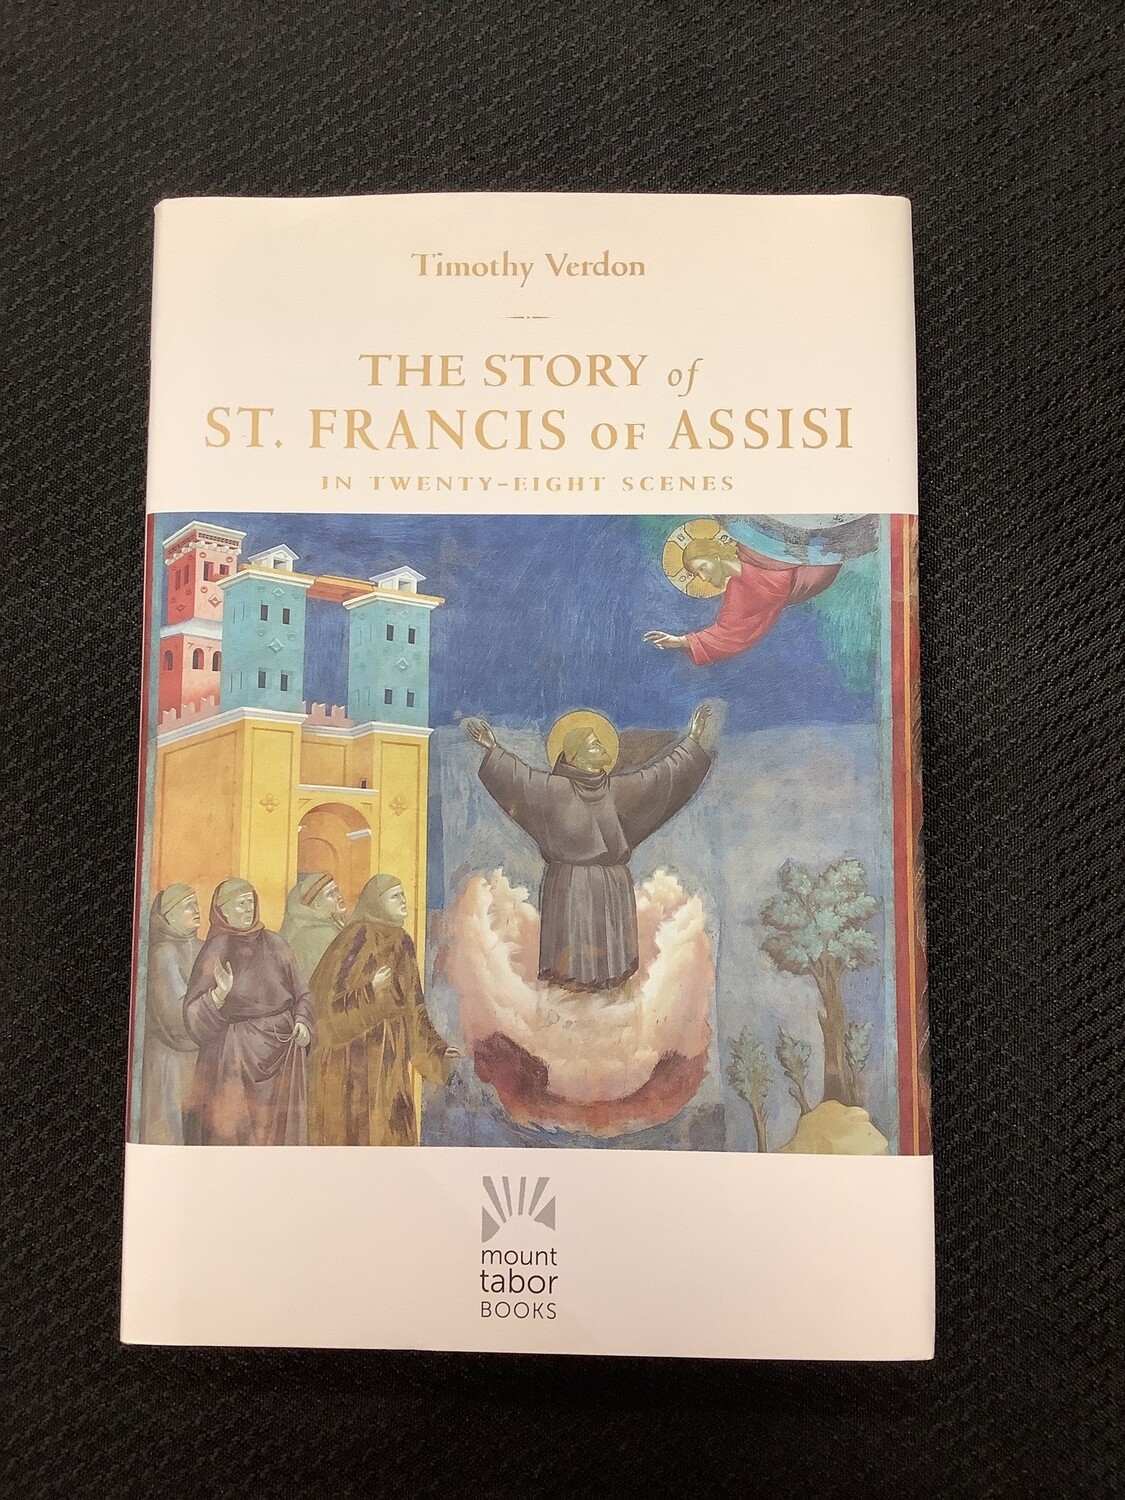 The Story Of St. Francis Of Assisi in Twenty-eight Scenes - Timothy Verdon